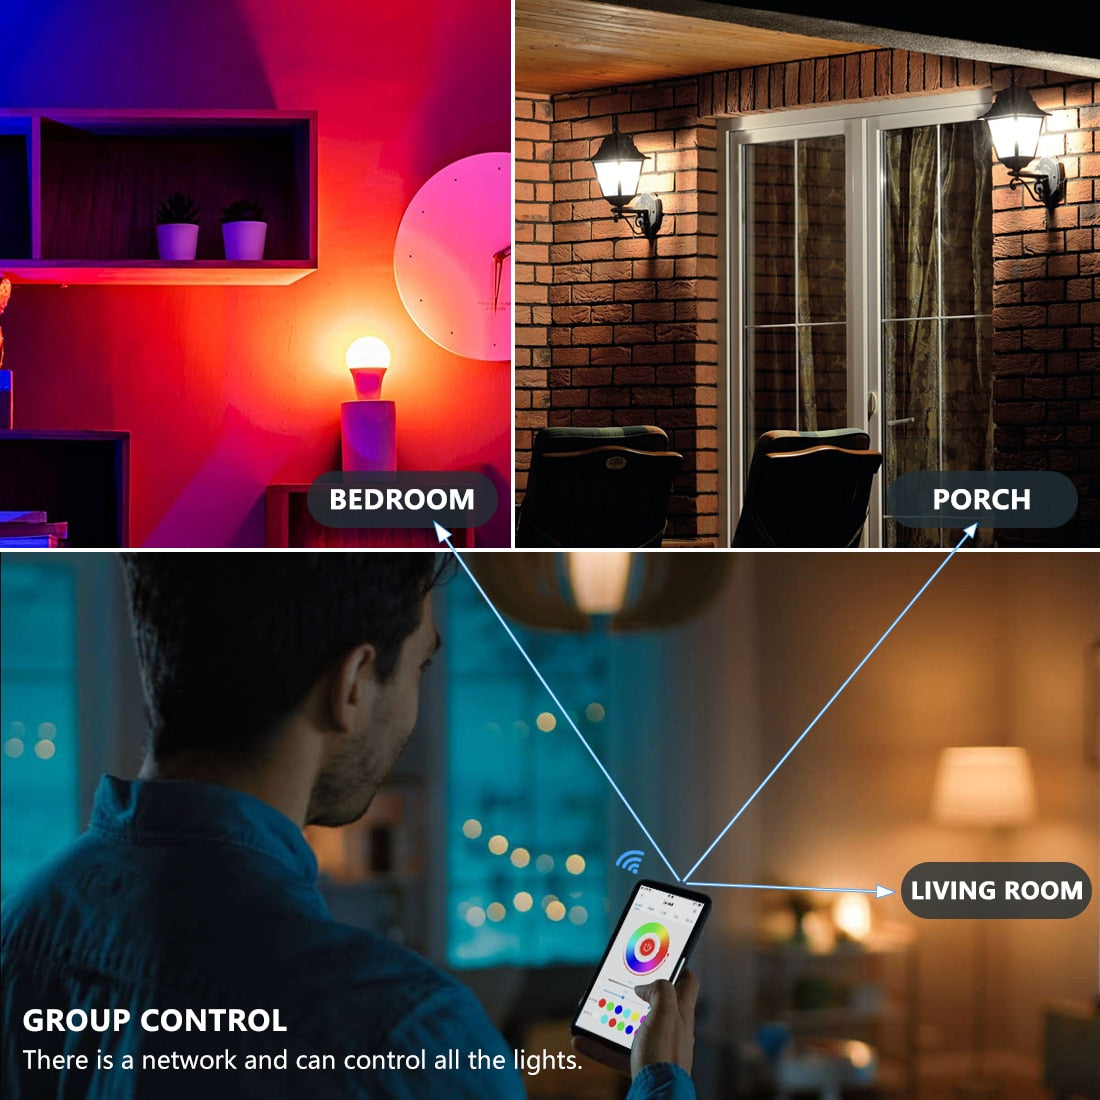 Wi-Fi Smart RGB + White Light Bulb - Alexa/Google Home Compatible - Dimmable, Timer, Color Changing